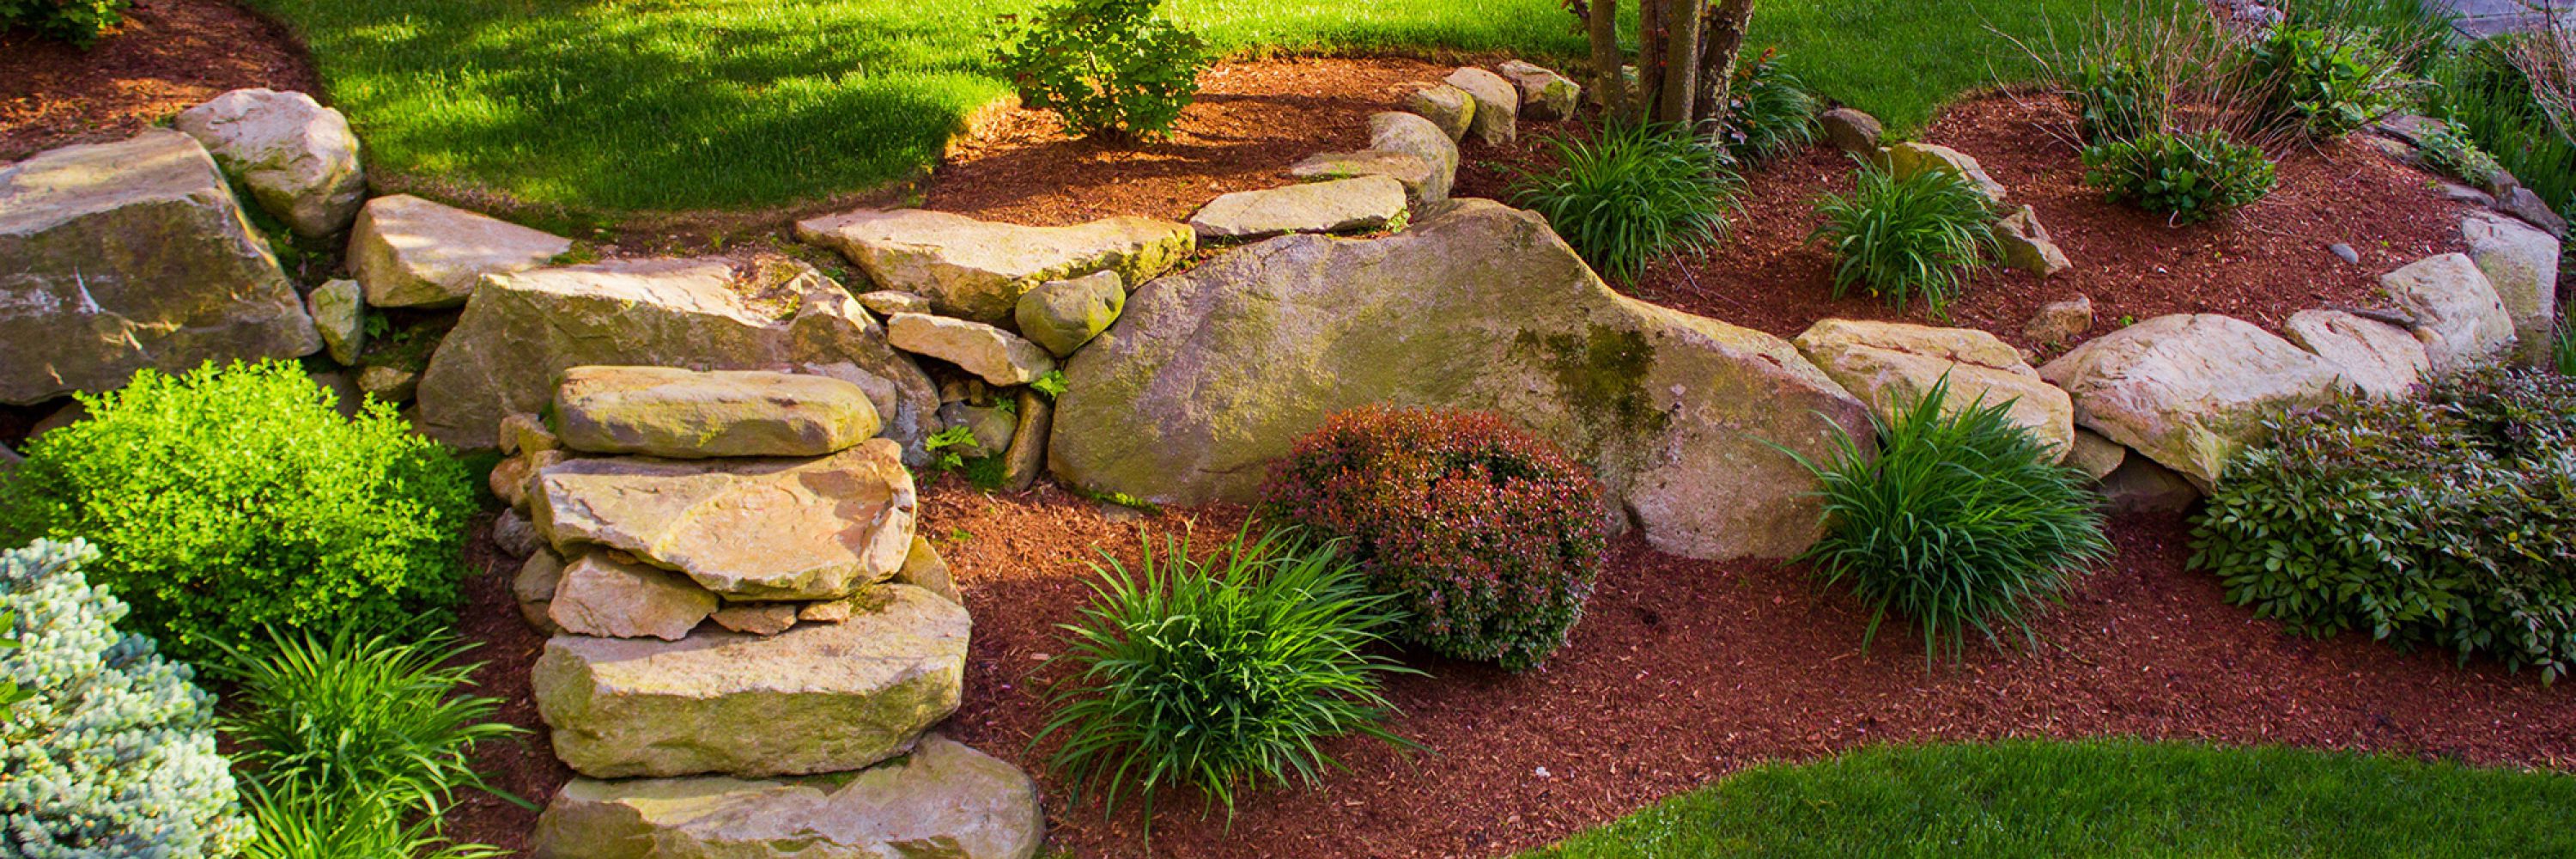 Website Curb appeal